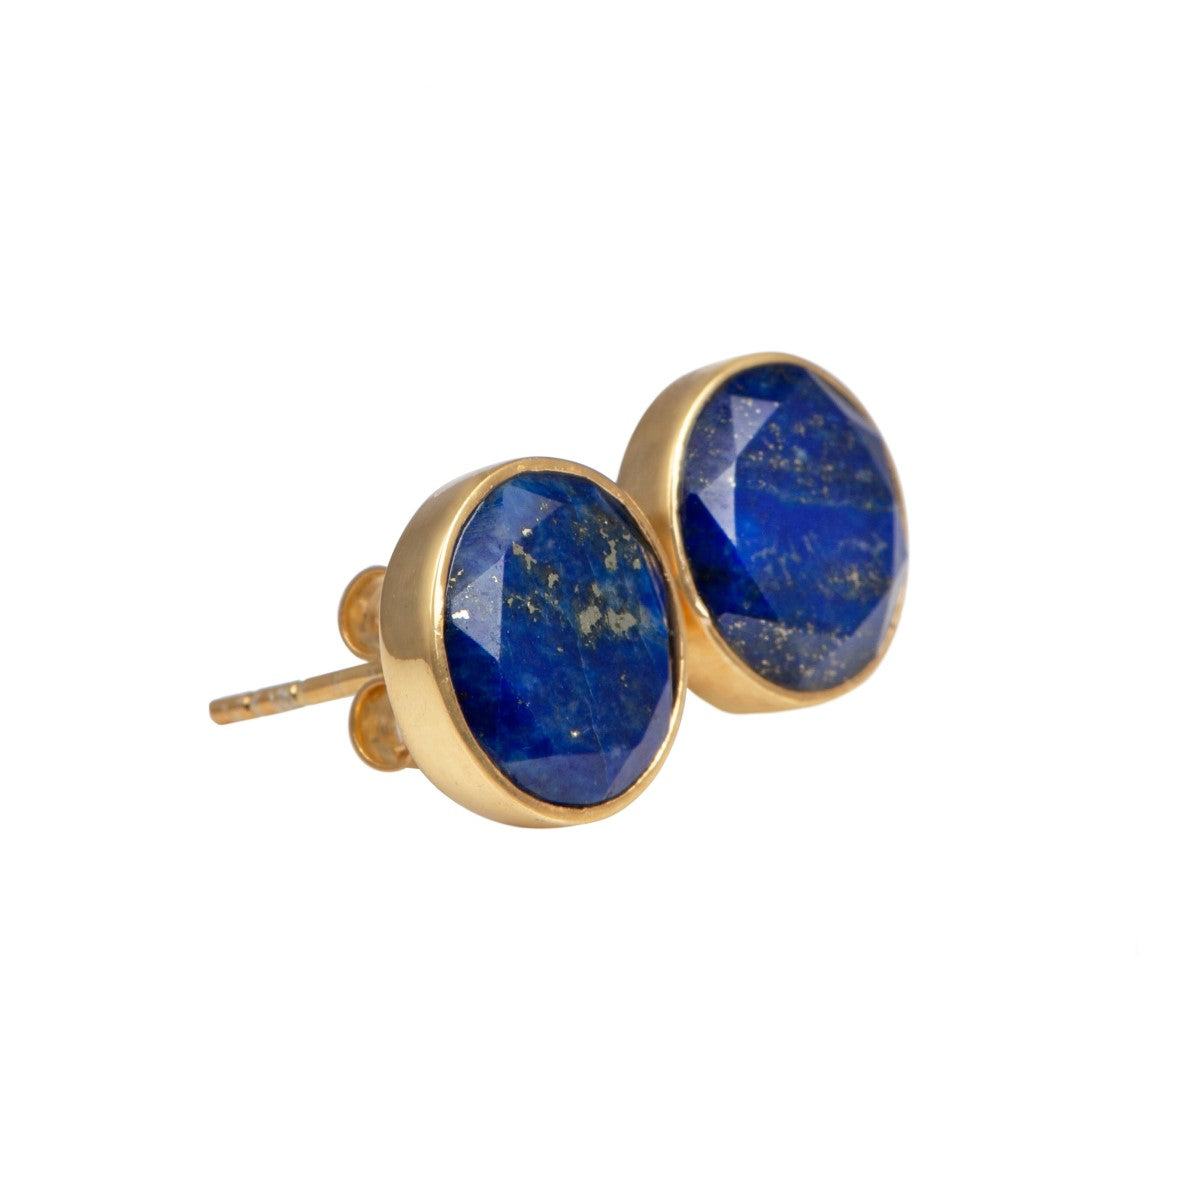 Lapis Lazuli Studs in Gold Plated Sterling Silver with a Round Faceted Gemstone